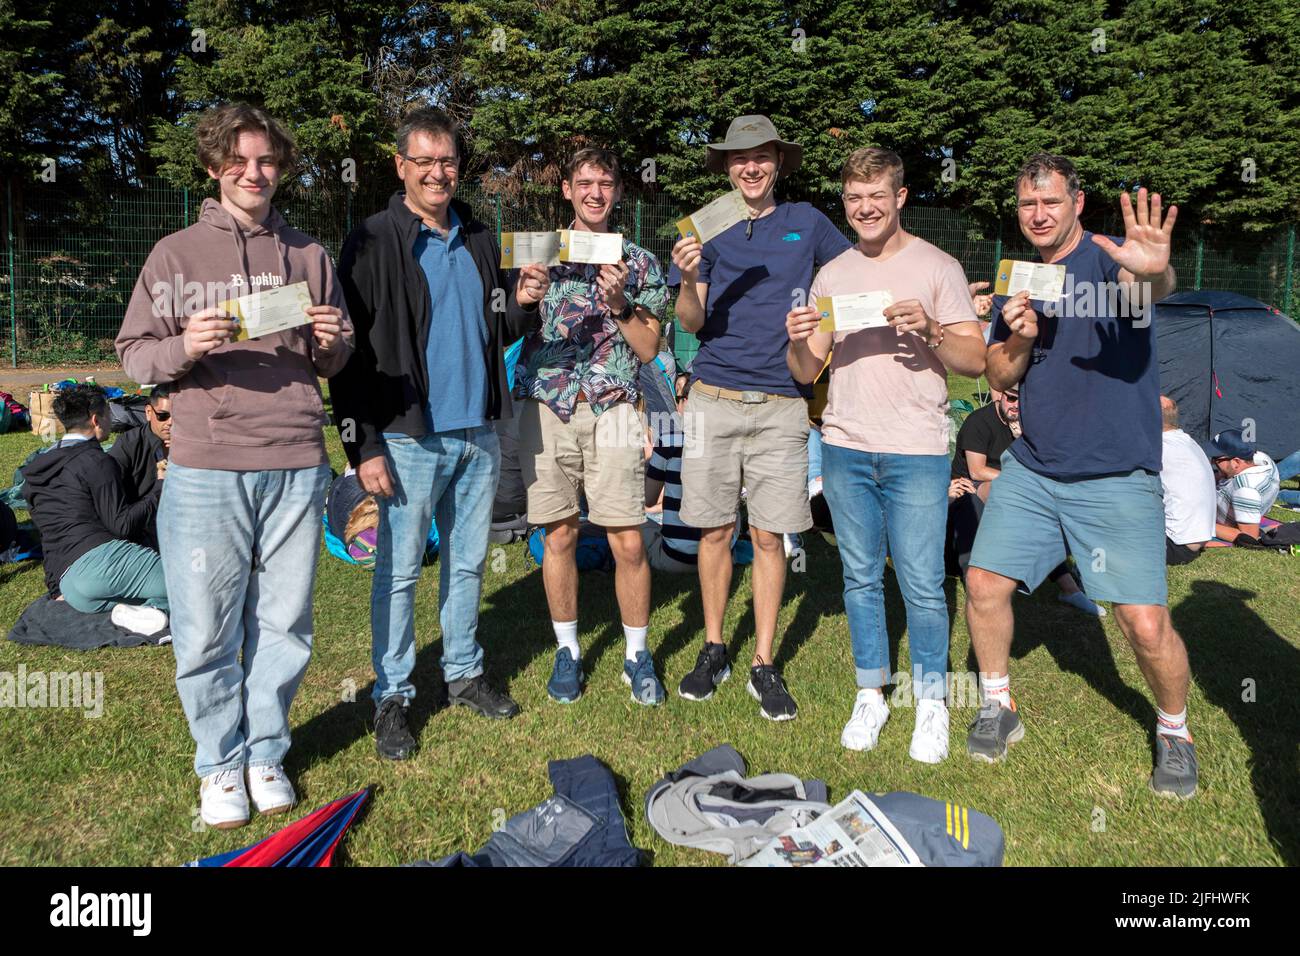 Tennis fans form long queues at Wimbledon Park this morning for tickets ahead of The Championship.   Pictured: A group of fans from South Africa queui Stock Photo